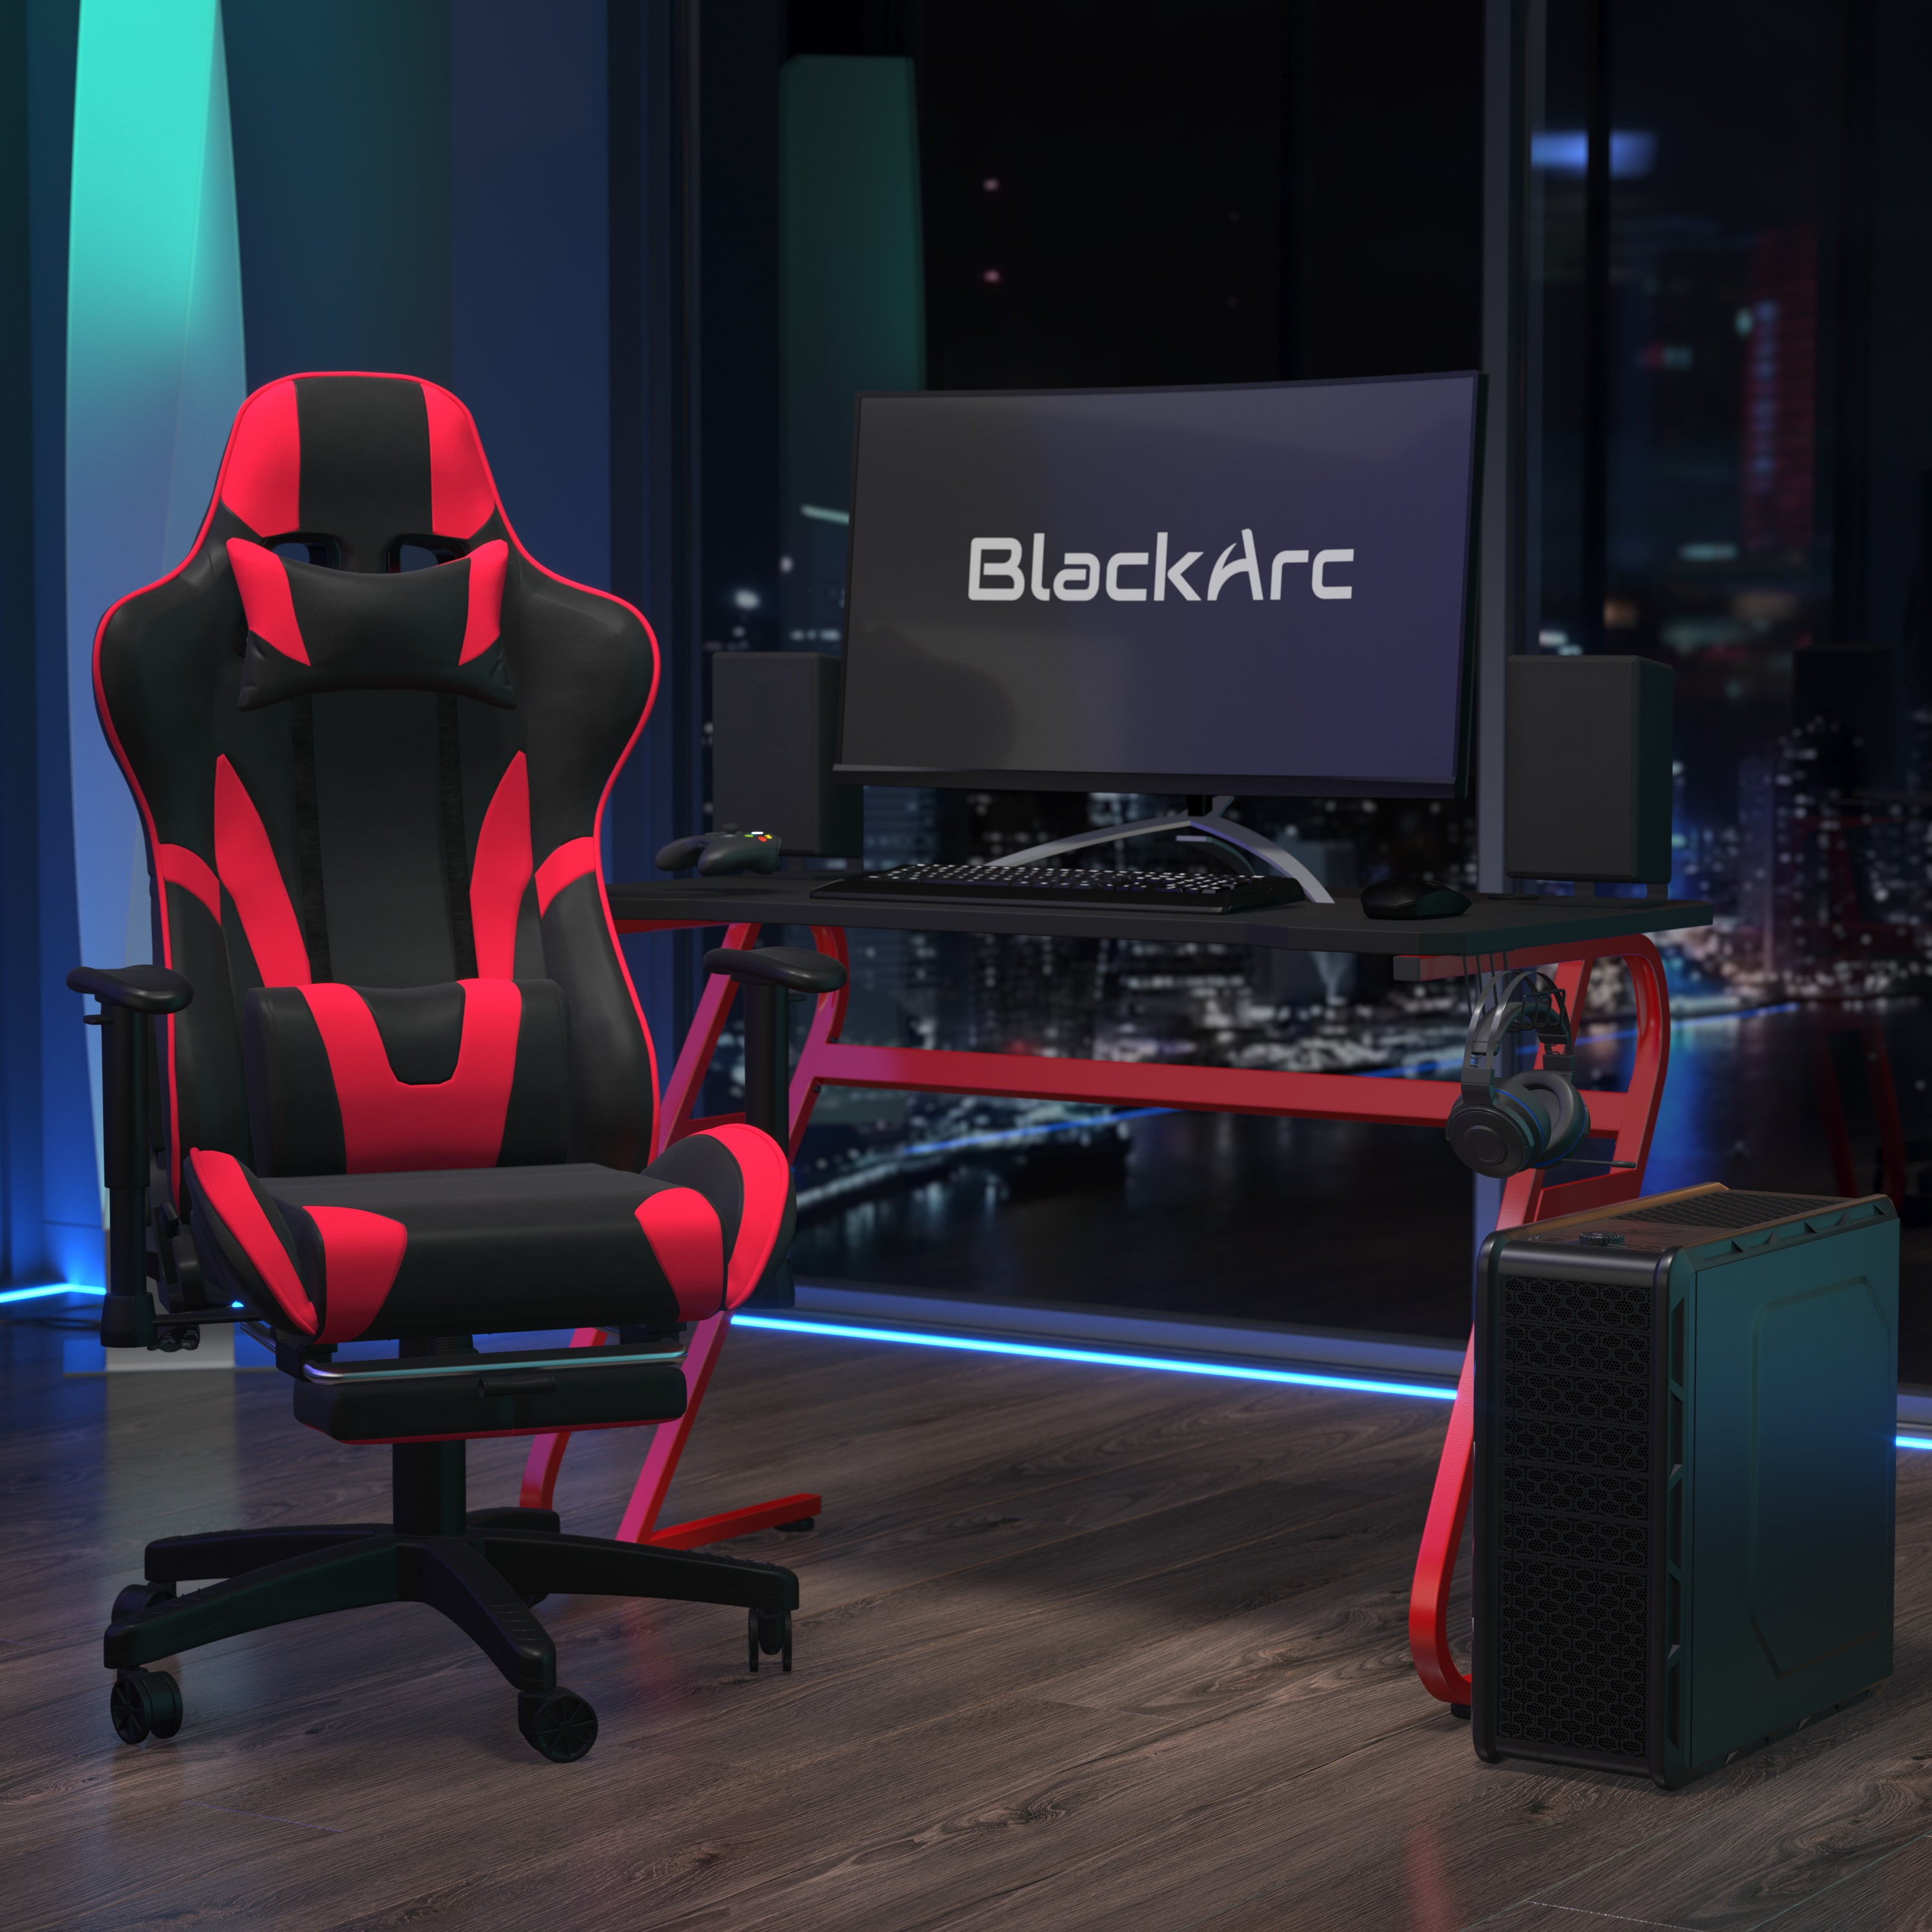 BlackArc Echo Desk & Chair Set: Black Red Leather Reclining Gaming Chair; Gaming with Headphone Hook and Cupholder - Walmart.com